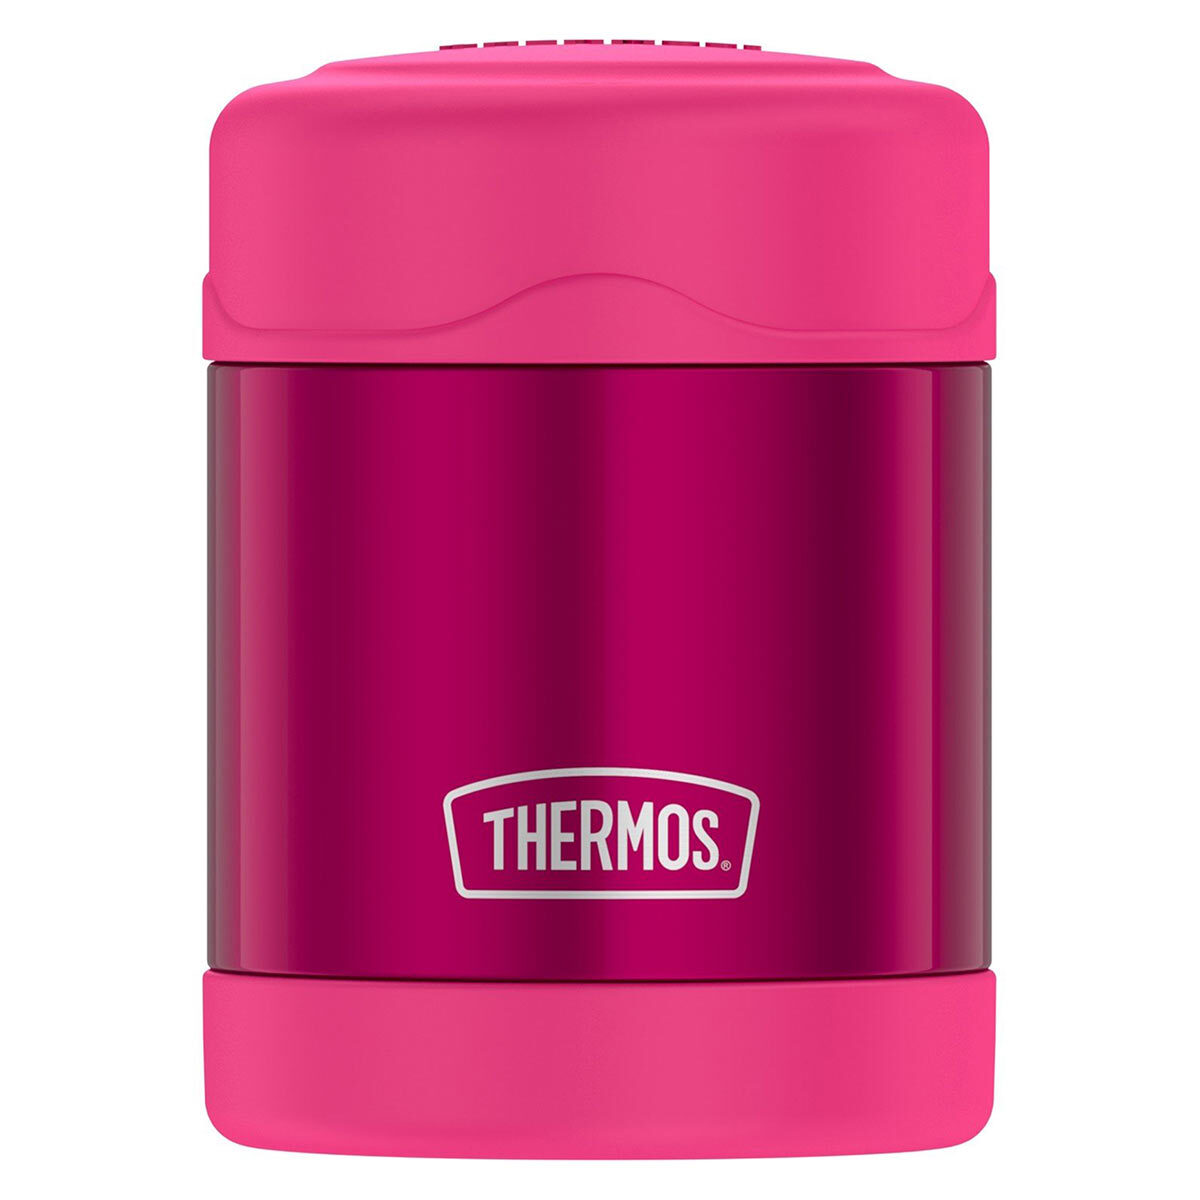 Thermos FUNtainer Food Flask and Water Bottle in Pink | Costco UK